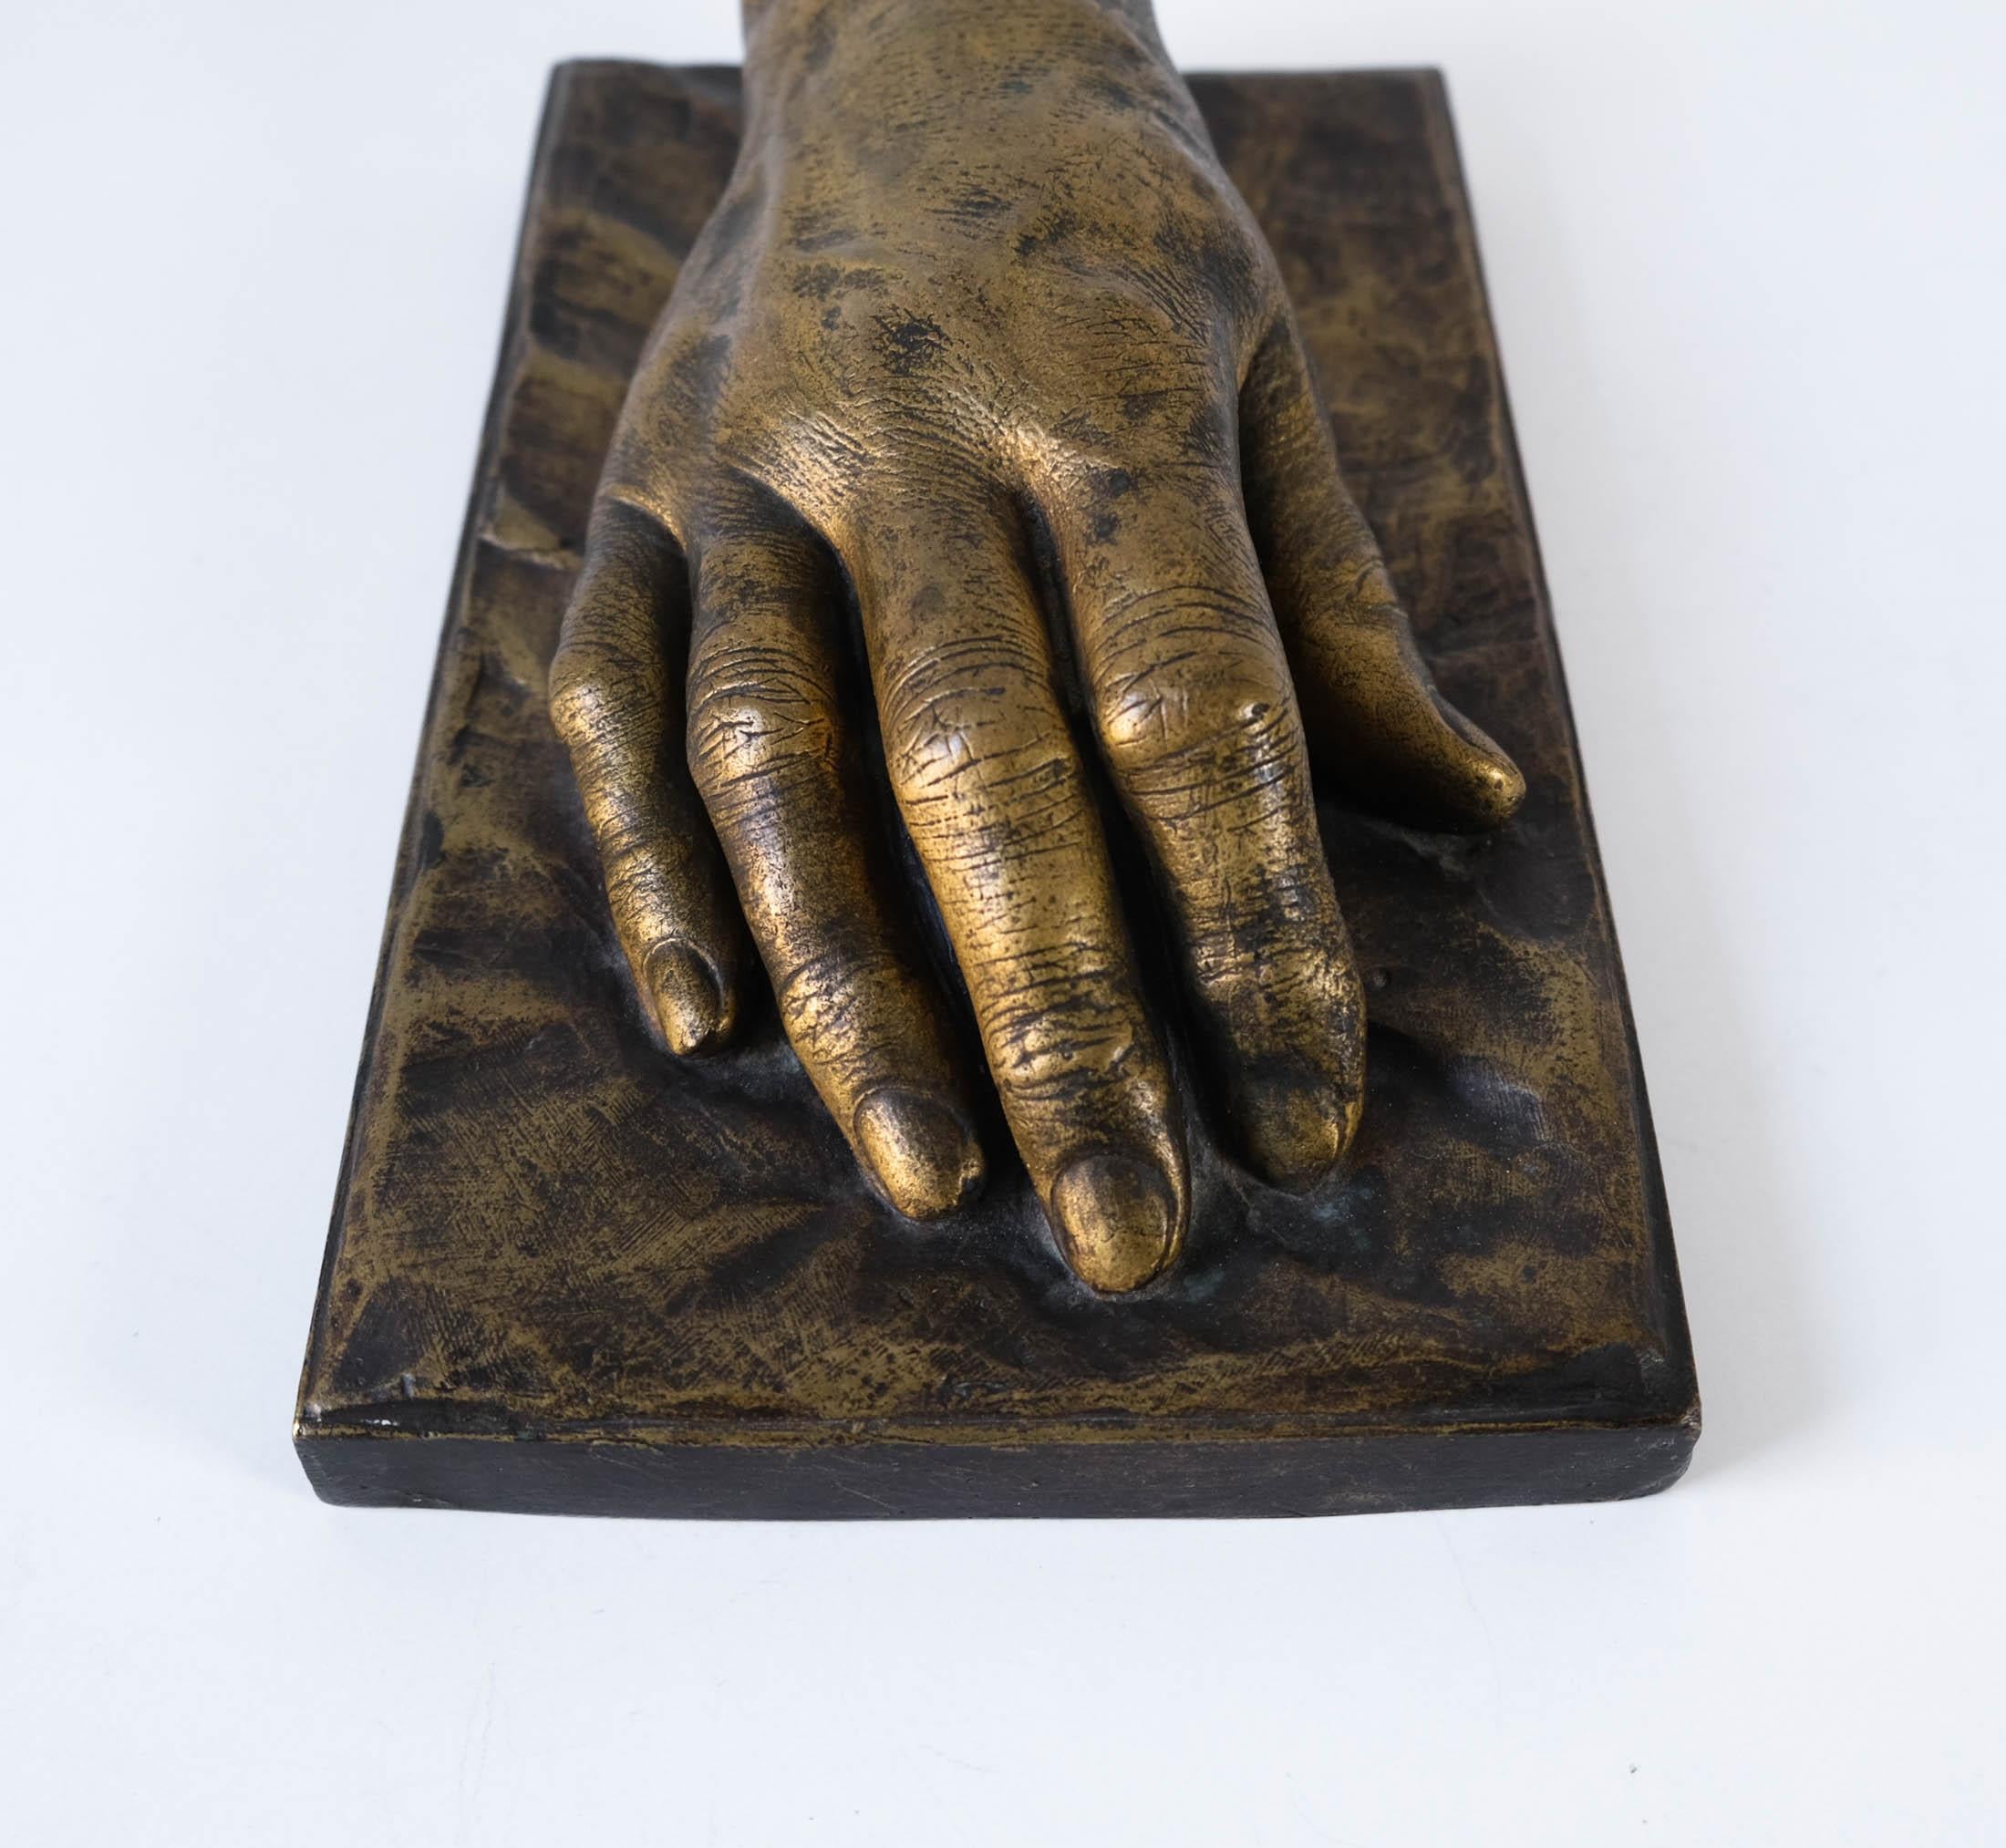 For sale a magnificent early 20th Century gilt bronze sculpture, cast using the Lost Wax (in French, 'Cire Perdue') process. This fine sculpture is a cast of Richard Alexander Hudnut's hand and was produced by the renowned Montagutelli Frères